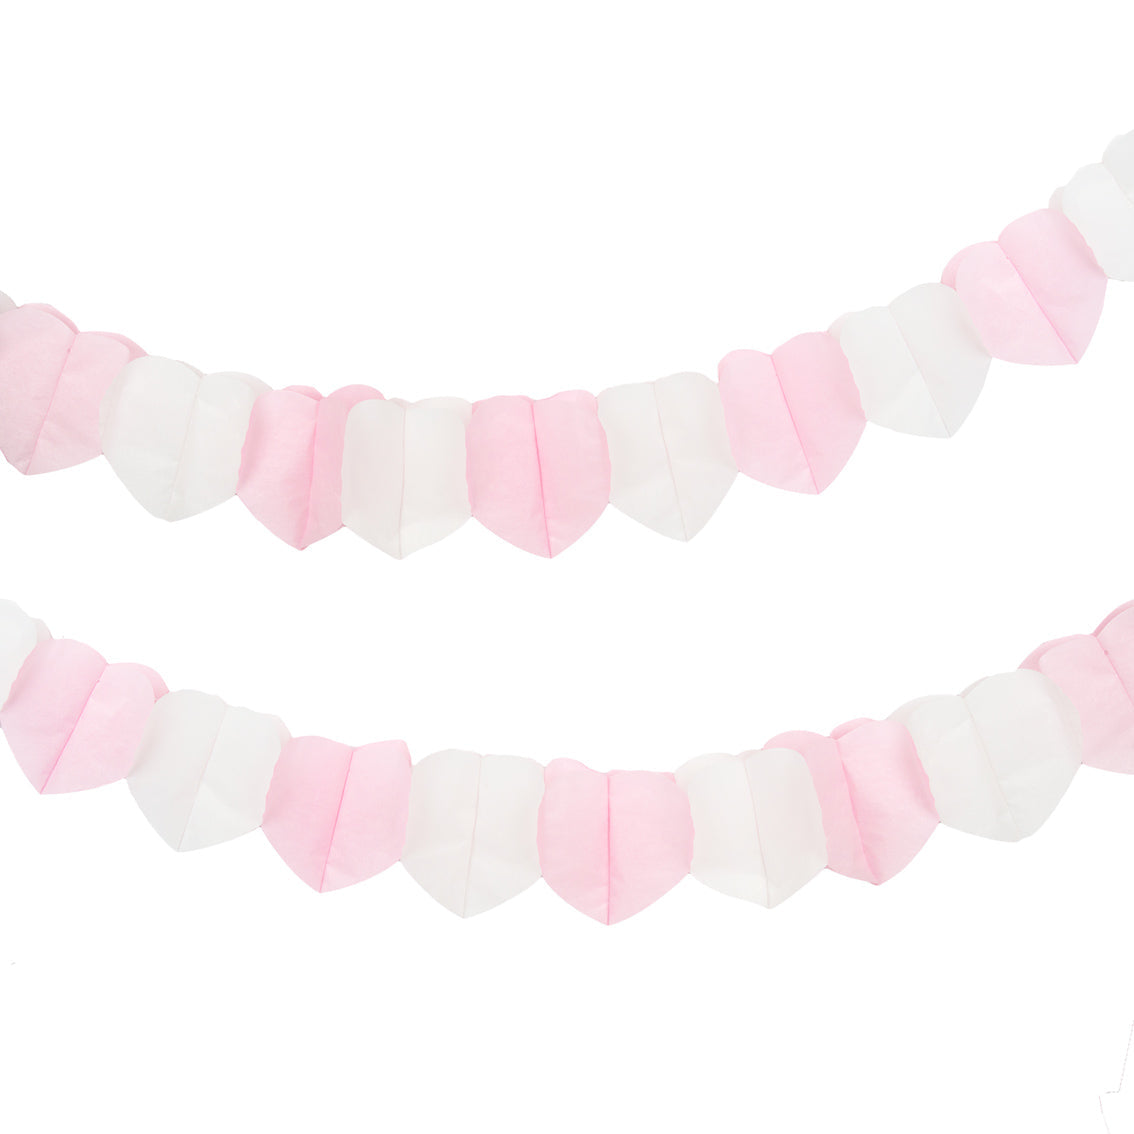 Pink Paper Heart Concertina Garland 3m by penny black